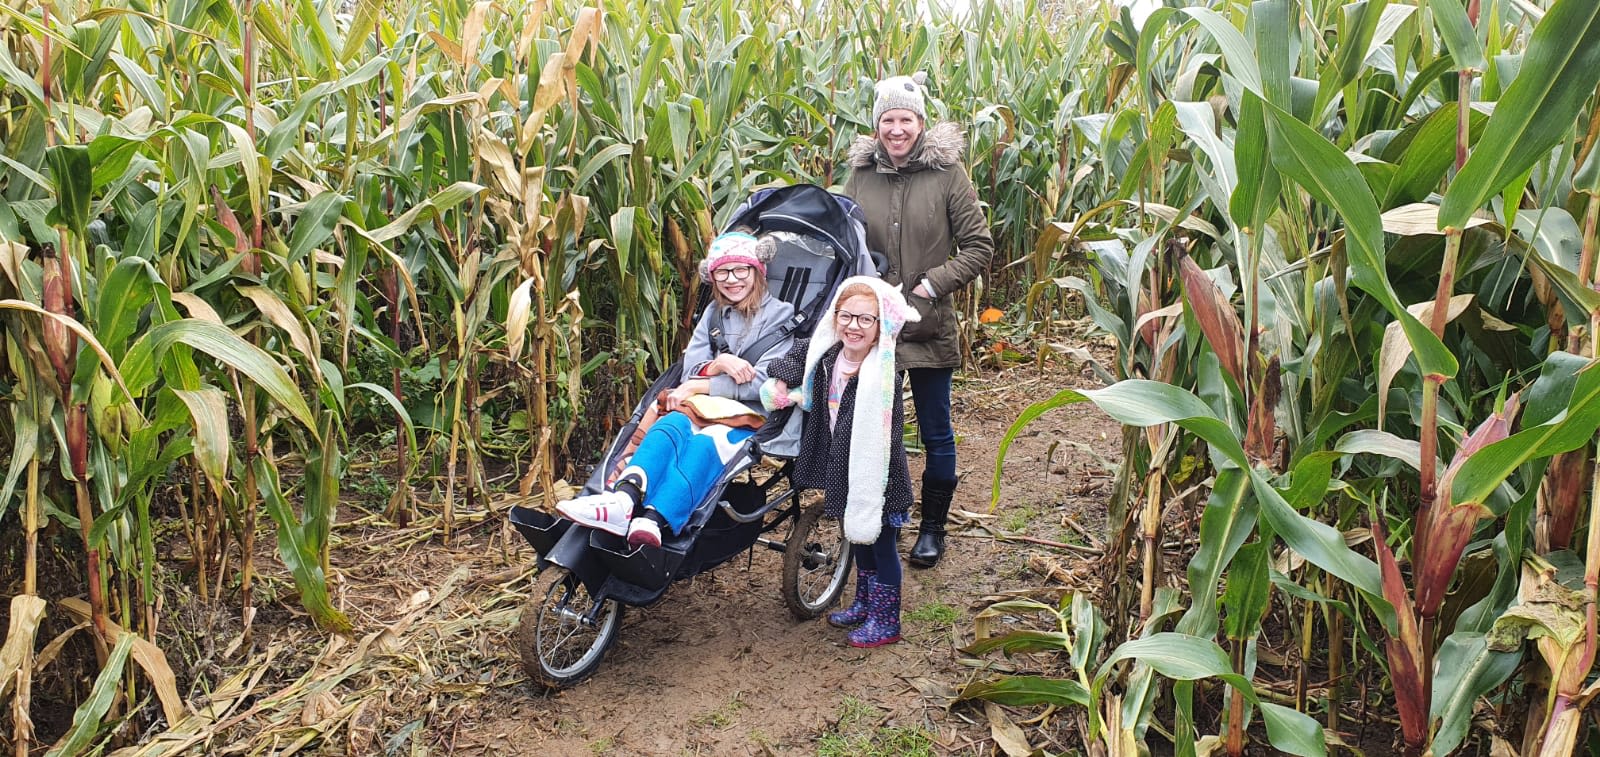 A girl, Lily, in a wheelchair-pushchair with her mum and little sister in a field of maize